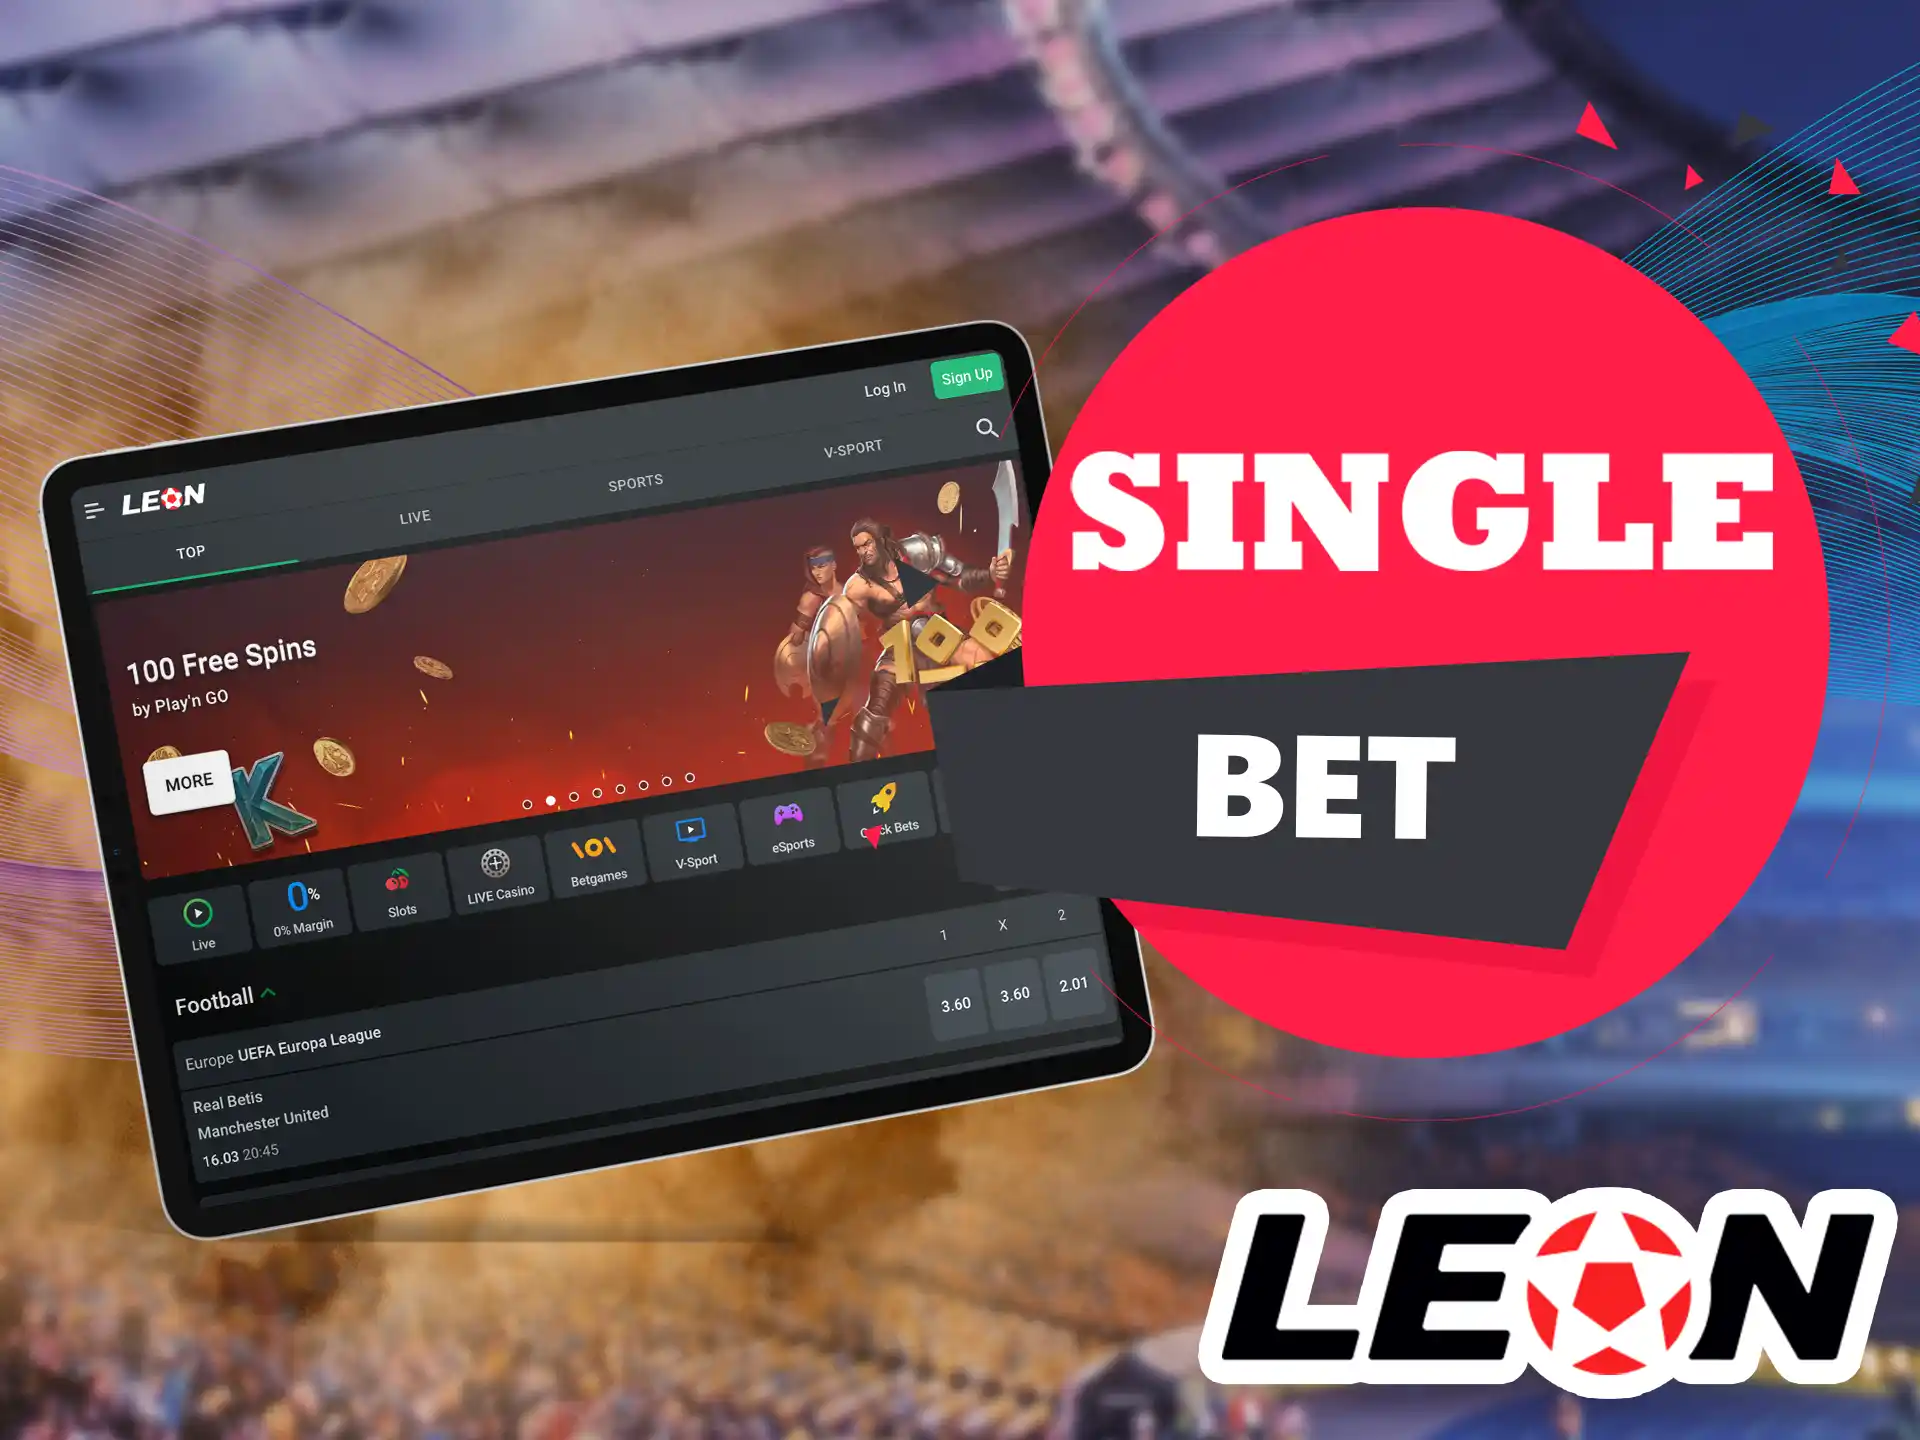 The easiest and most popular way to bet, it is stable and loved by many players in the Leon Bet app.